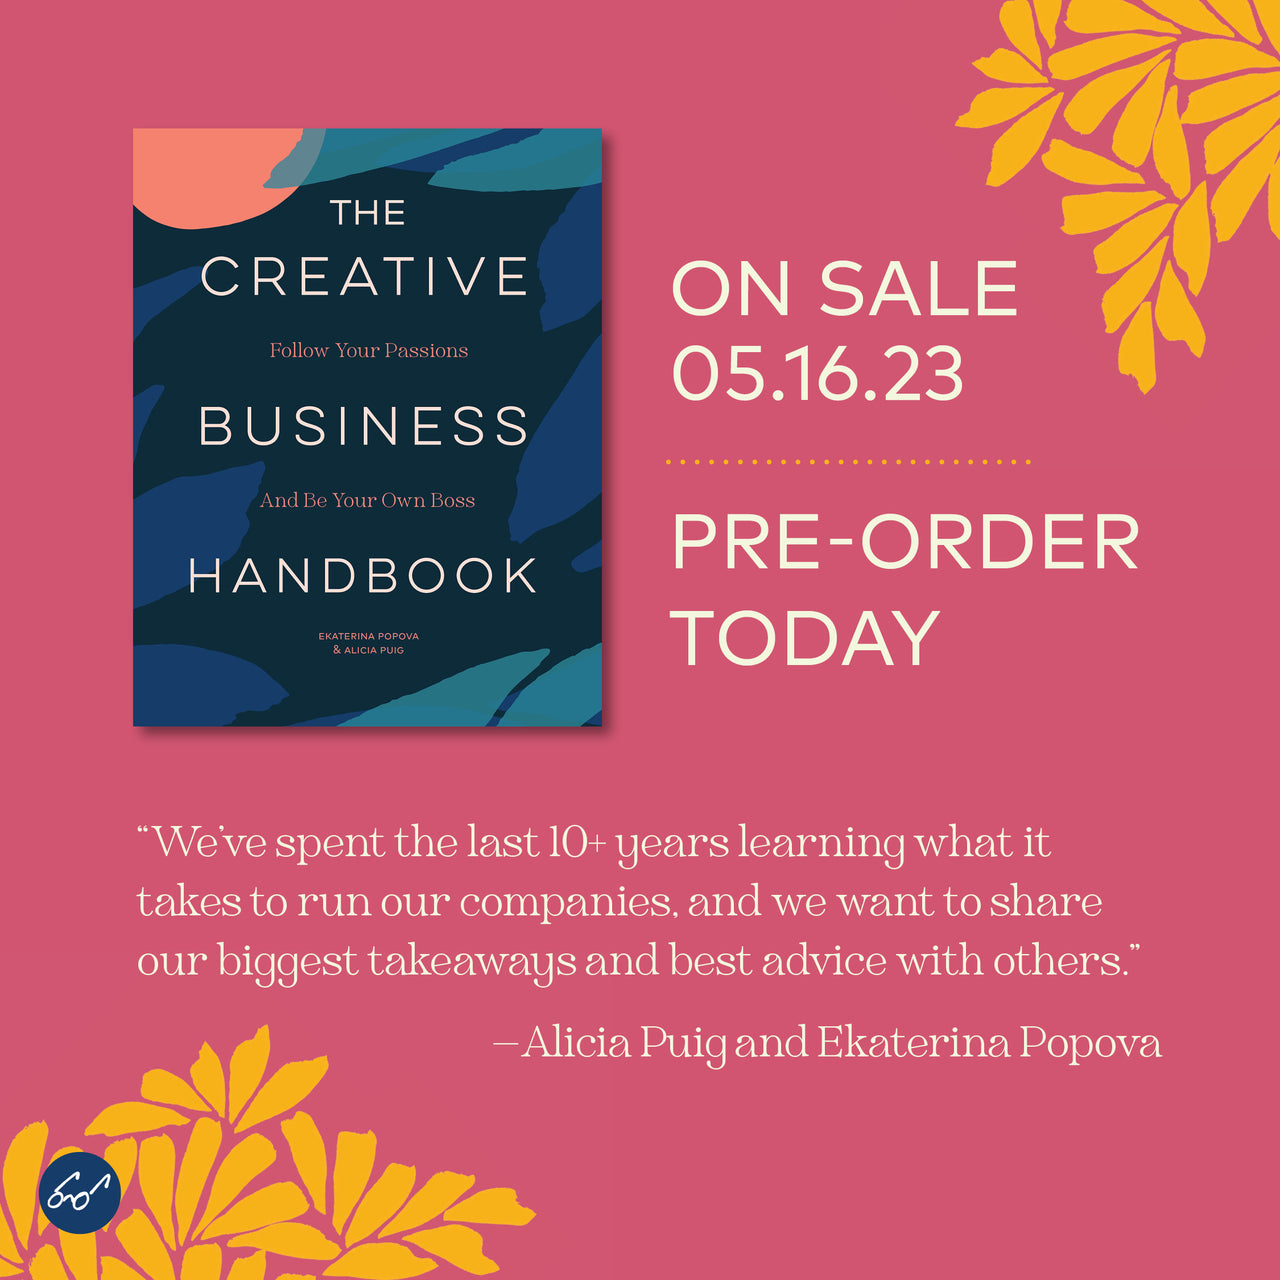 The Creative Business Handbook now available for presale!